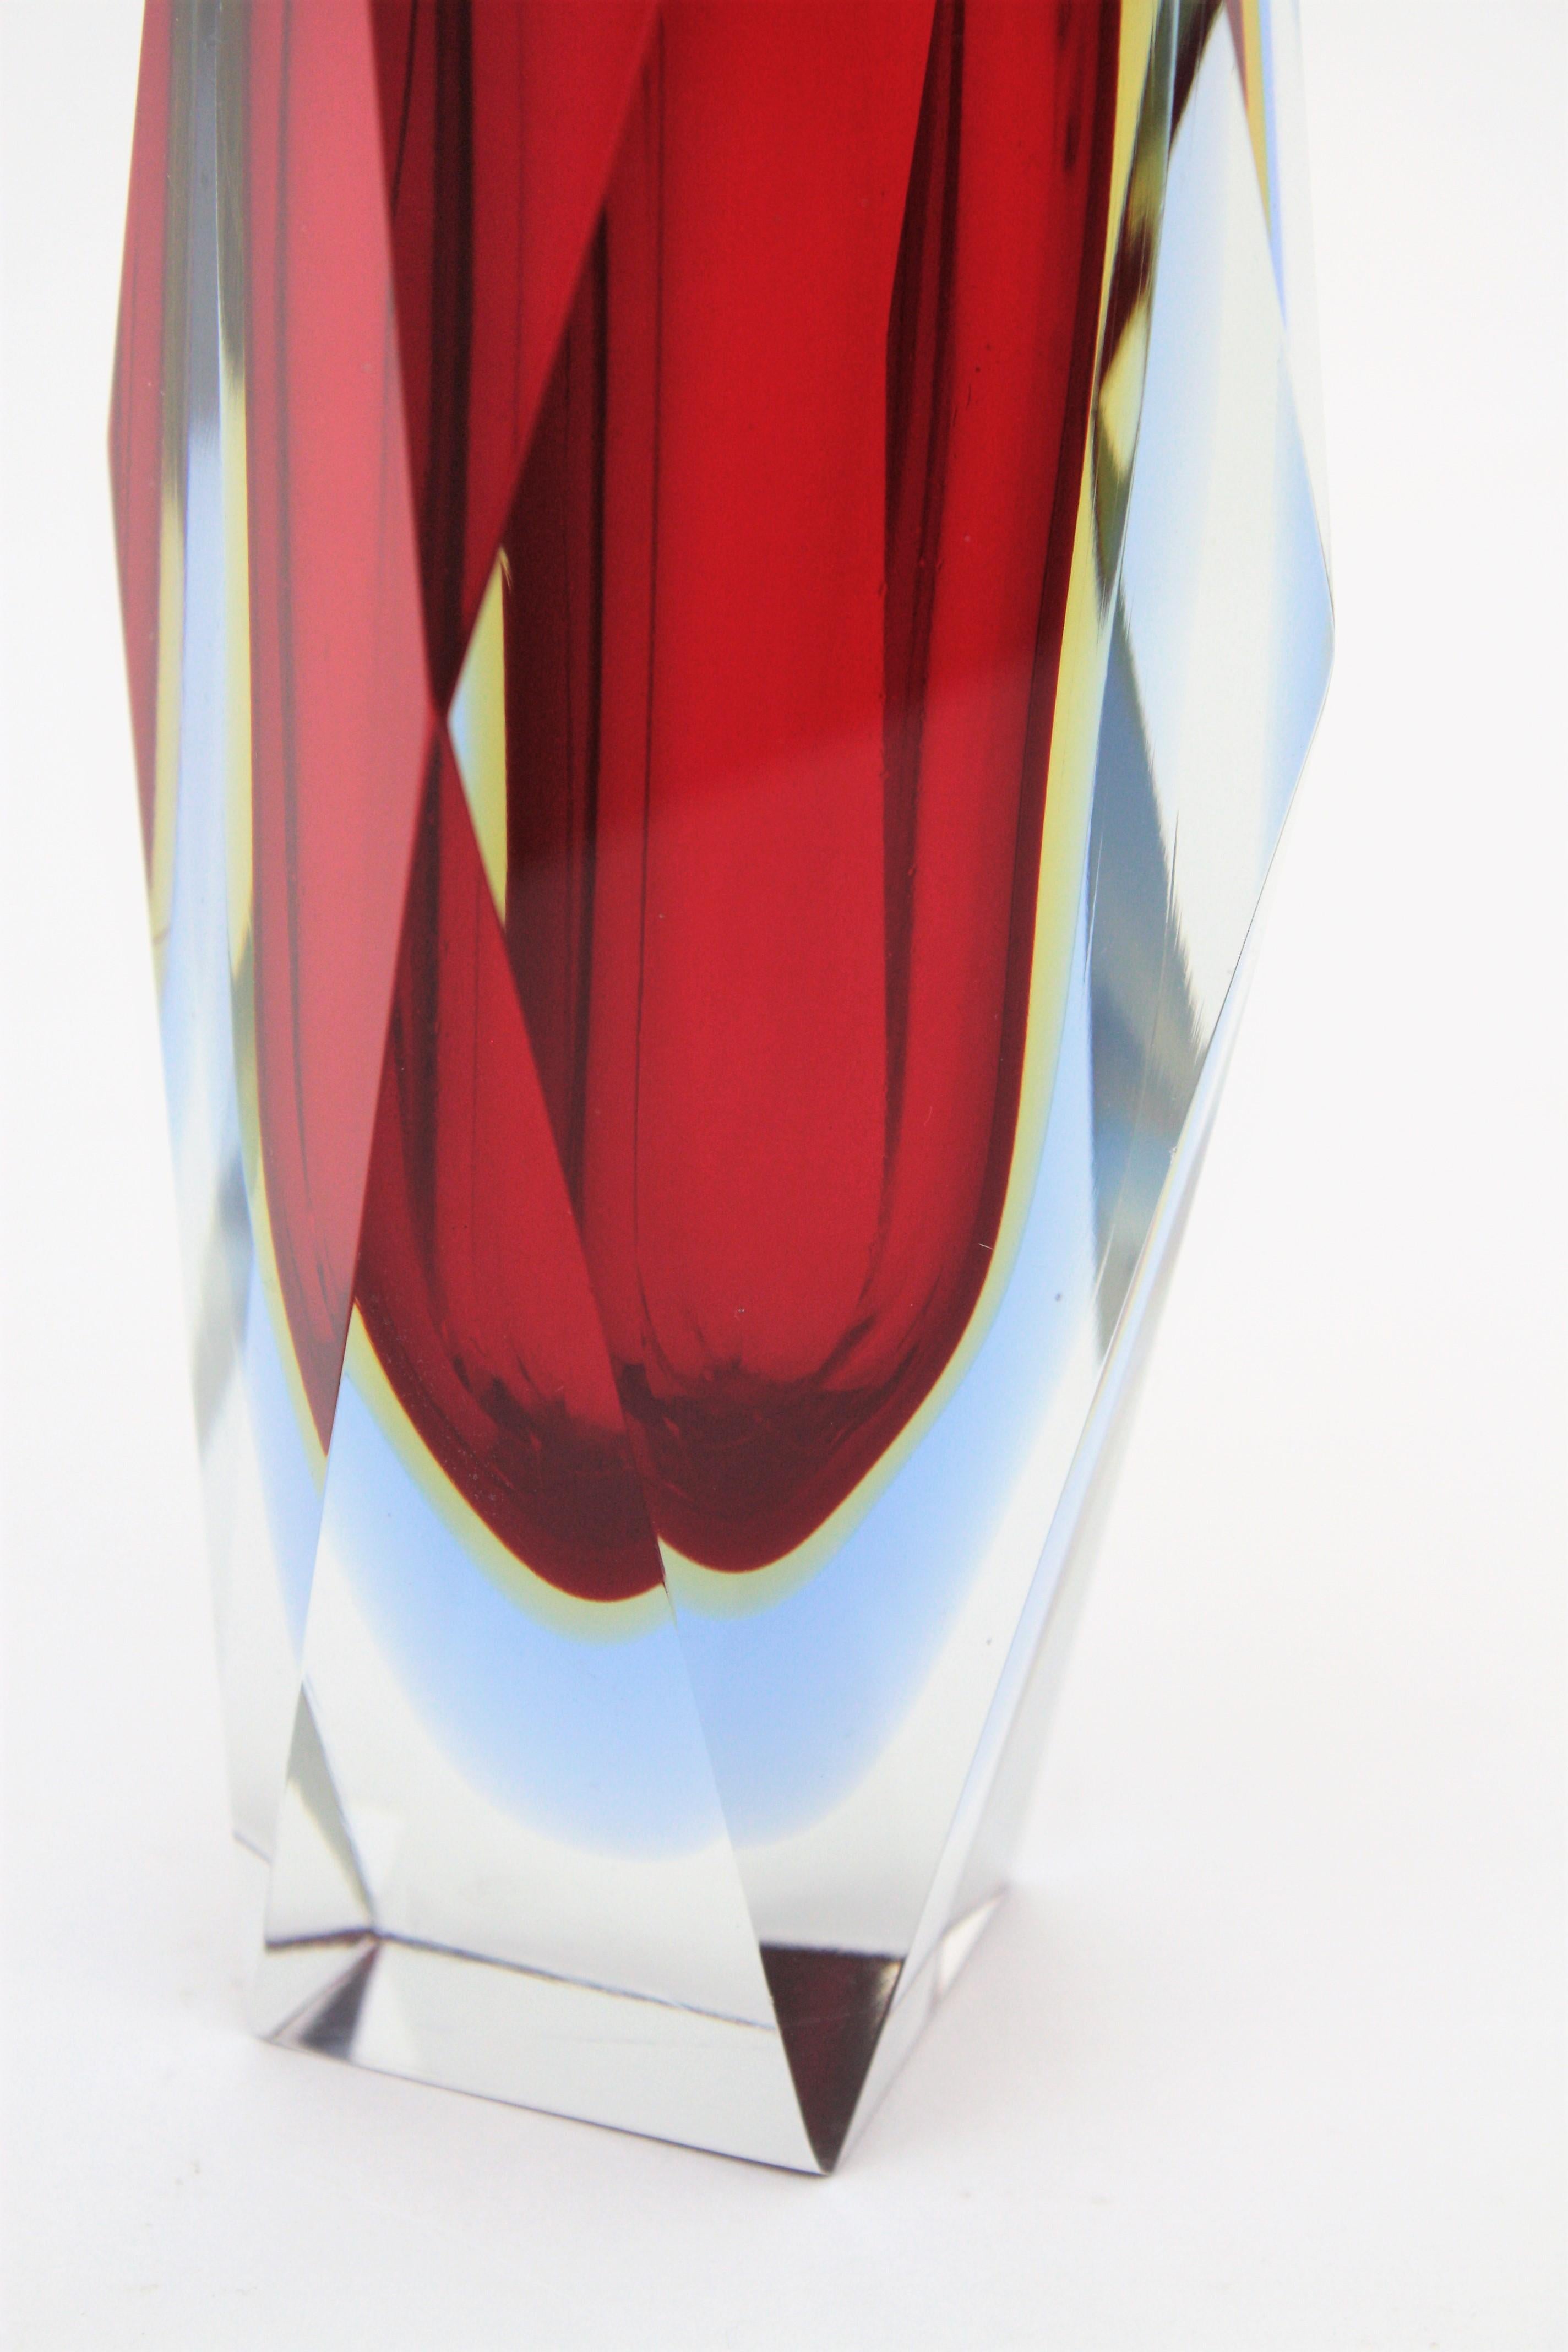 Mandruzzato Murano Sommerso Red, Blue, Yellow & Clear Faceted Glass Vase, 1960s For Sale 6